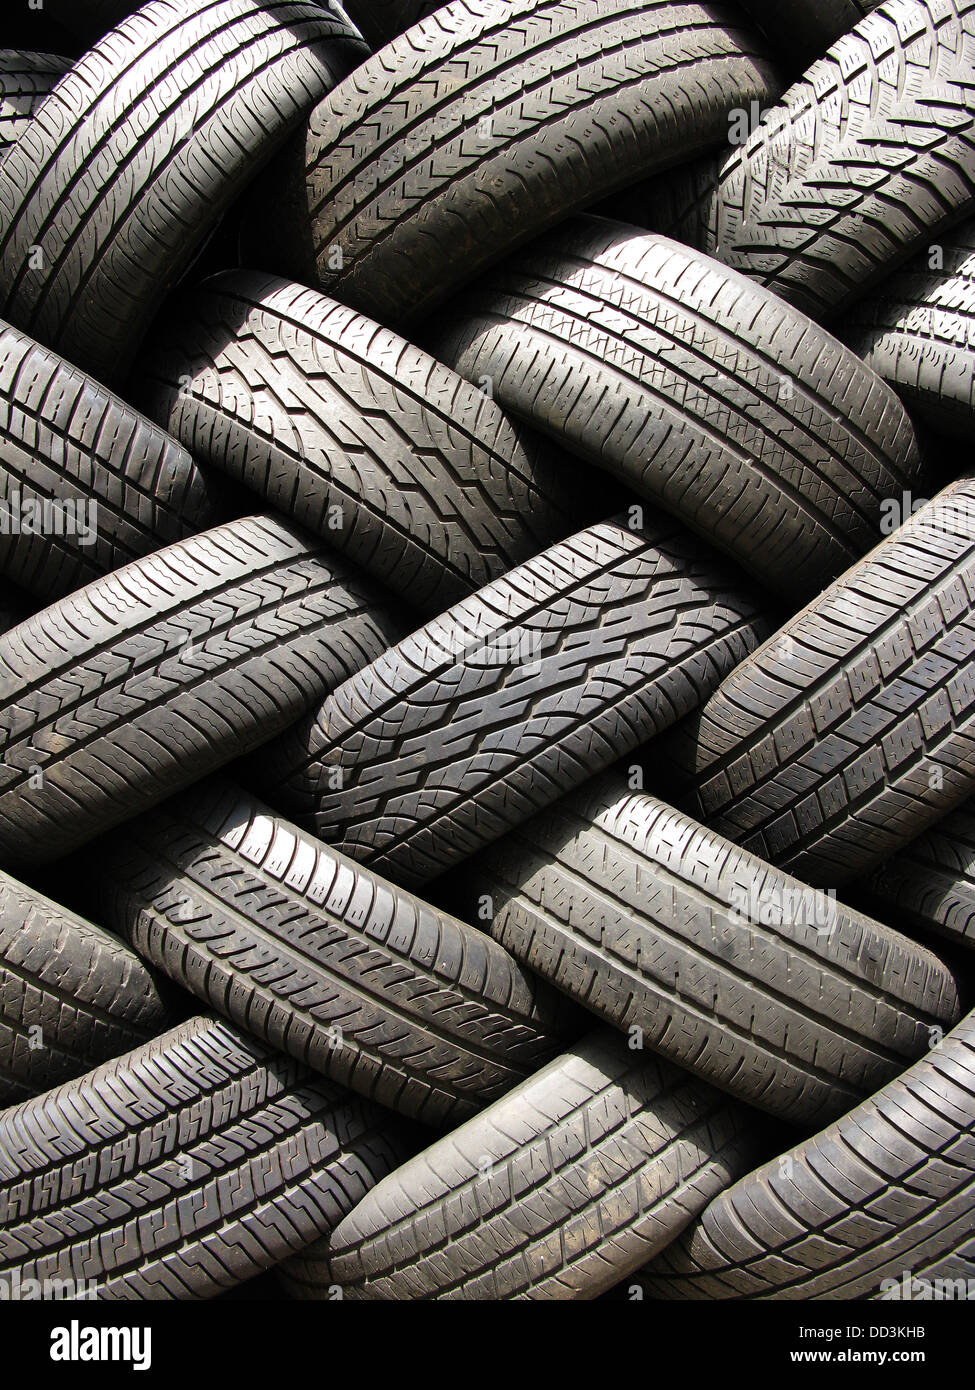 A large stack of used automotive car tires. Stock Photo